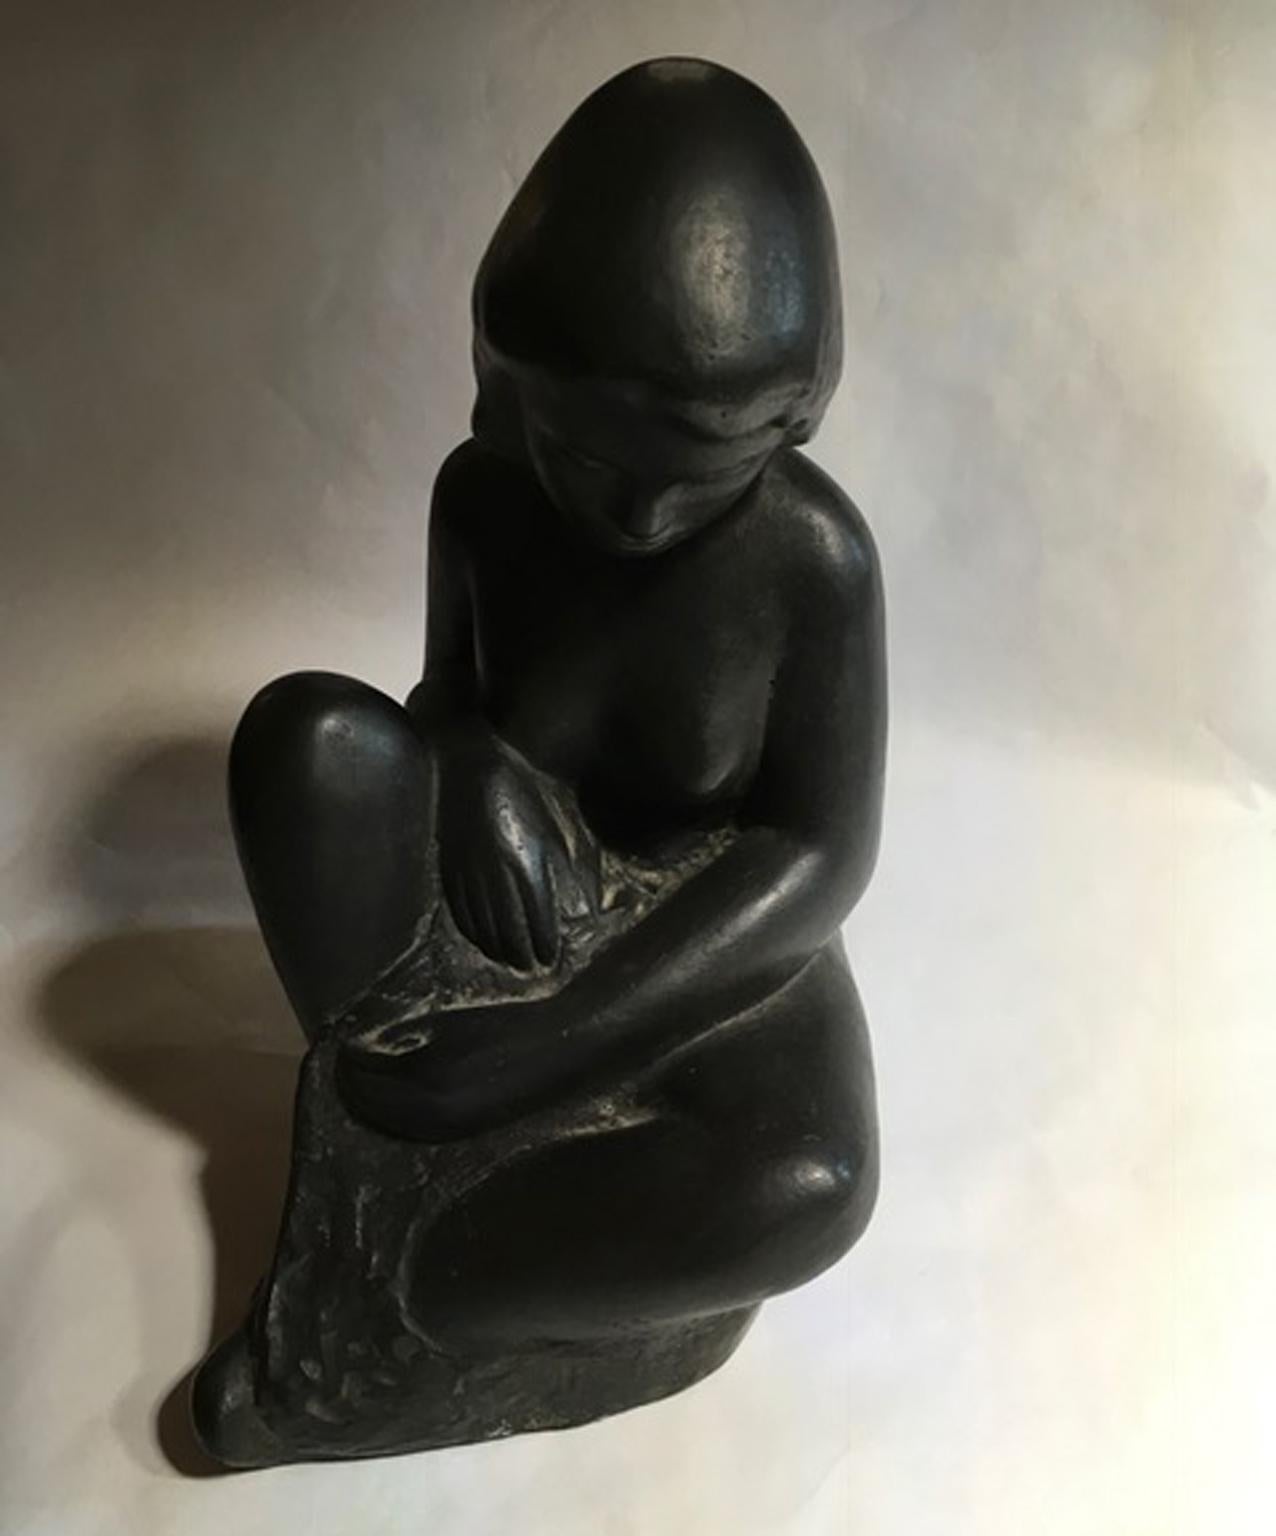 France 1920 bronze figurative sculpture. 

This beautiful bronze sculpture is an anonimus art work handmade in the early 20th century in the Northern part of the France, very influenced by Espressionism style.
With certificate of authenticity.